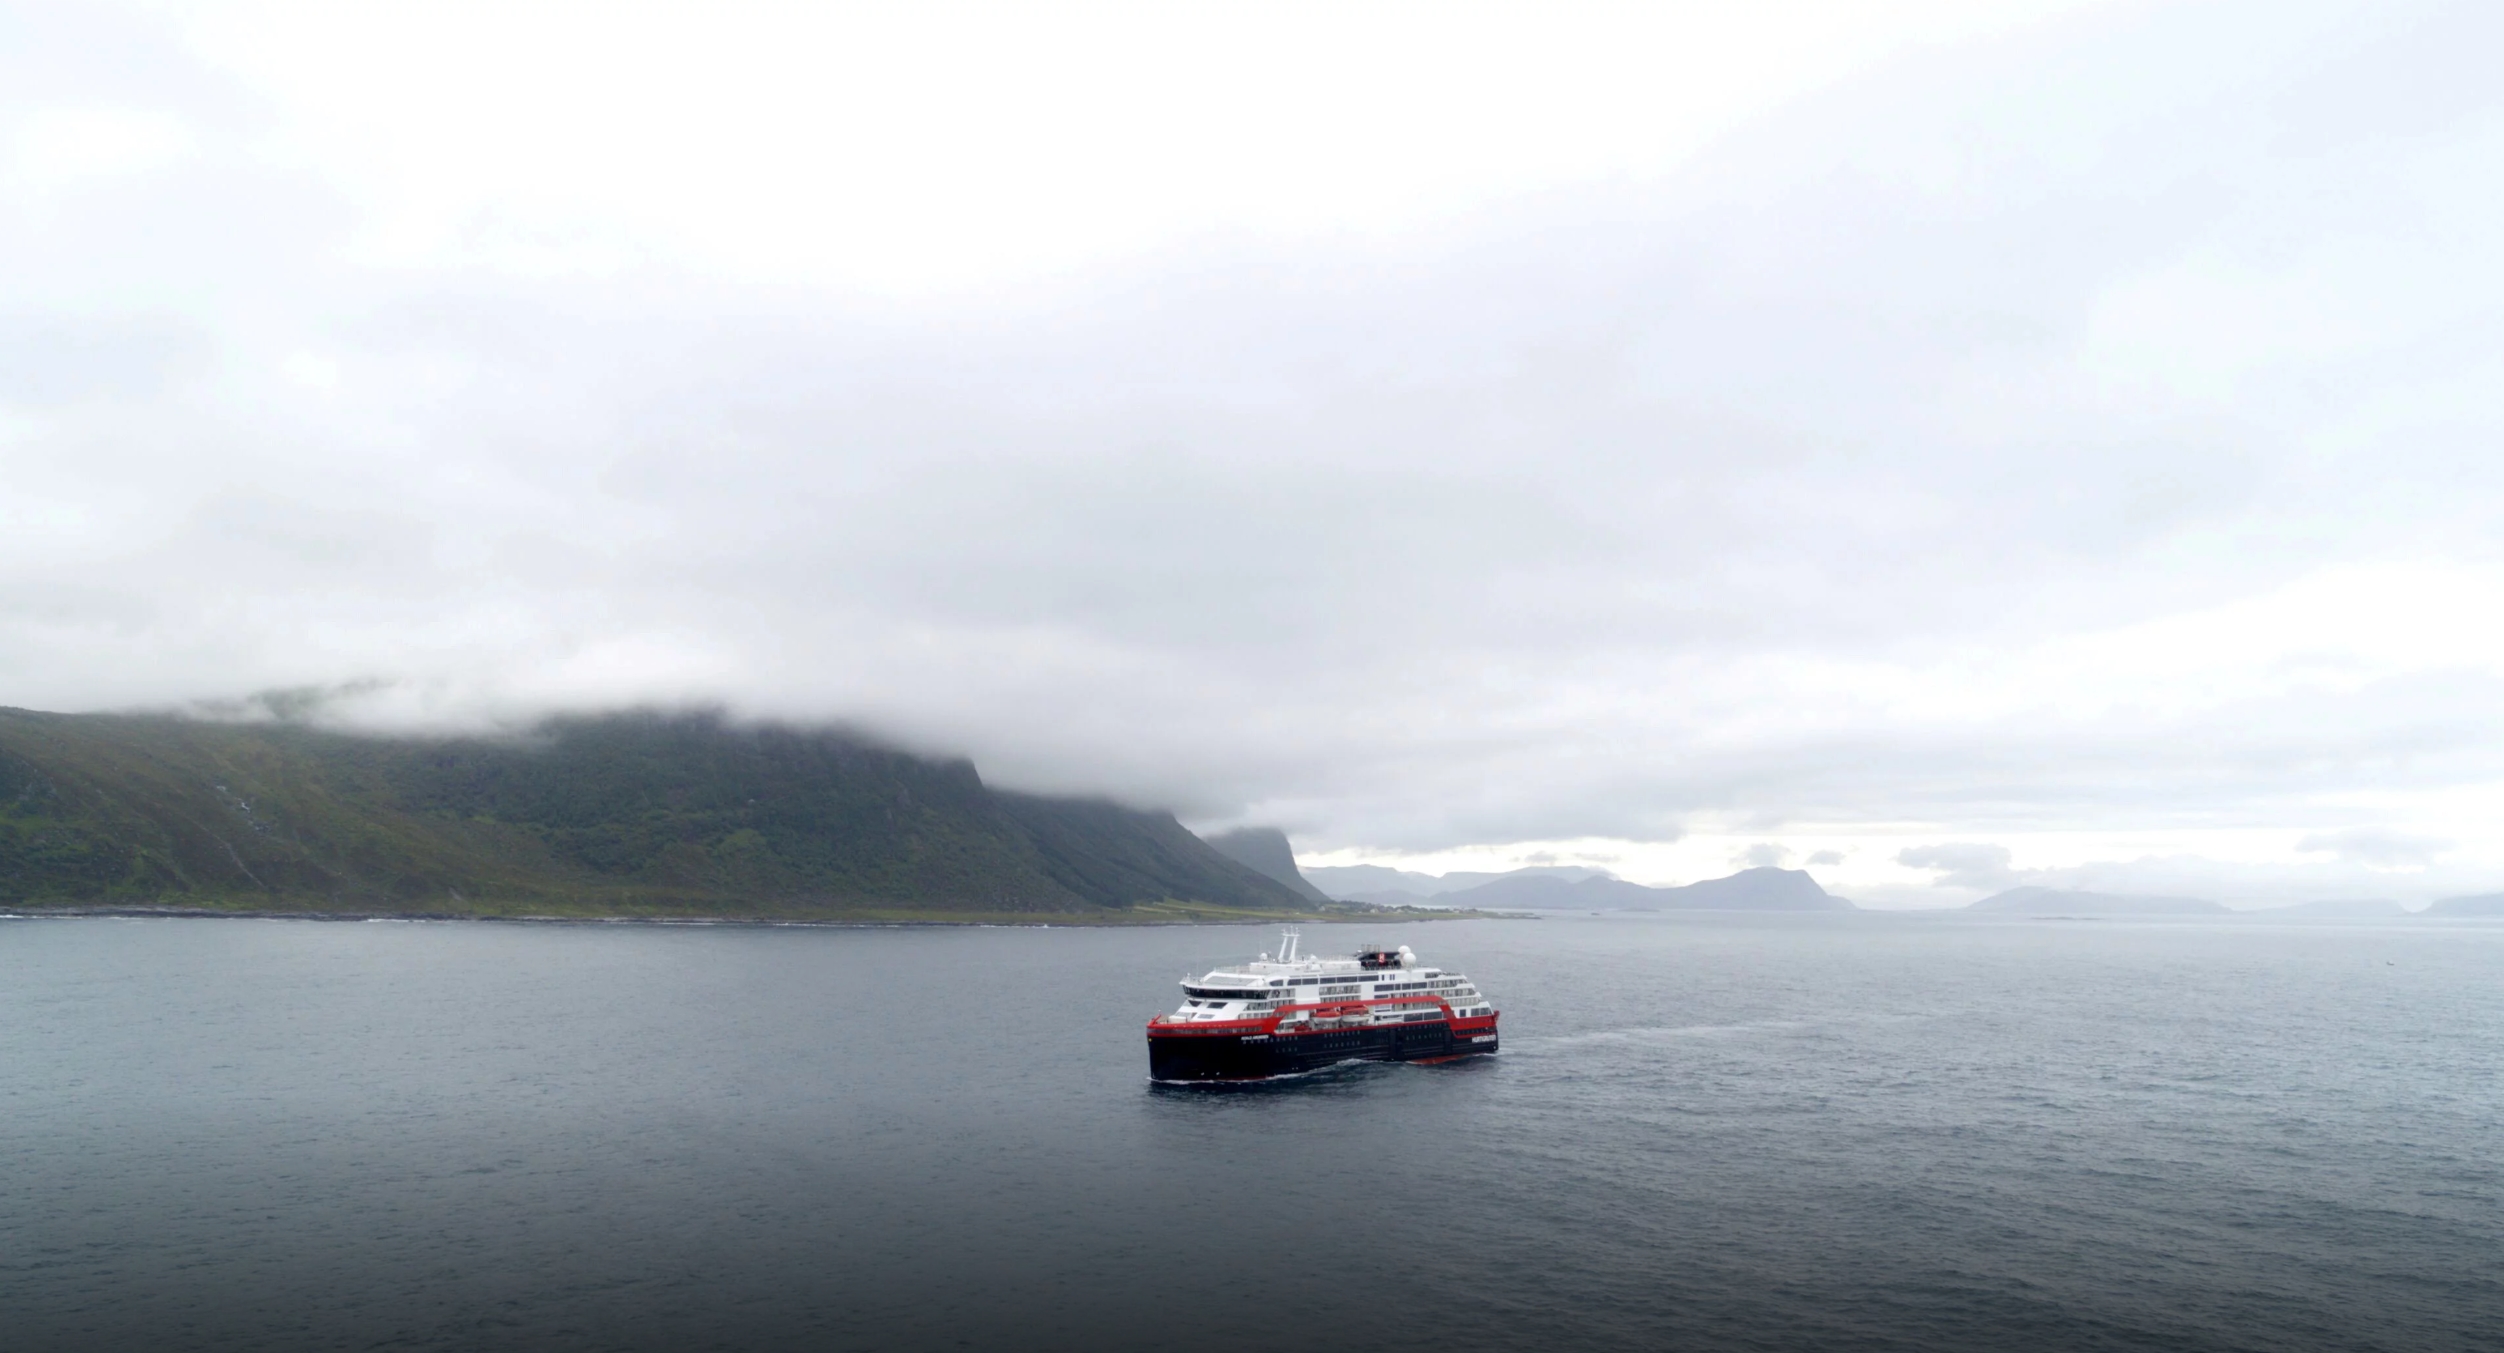 Hurtigruten’s cruise ship MS Roald Amundsen is seen in the sea near Ulsteinvik, Norway, on 1 July 2019. The Roald Amundsen is the world’s first cruise ship propelled partially by battery power and is set to head out from northern Norway on its maiden voyage, cruise operator Hurtigruten said on Monday. The hybrid expedition cruise ship can take 500 passengers and is designed to sail in harsh climate waters. Named after the Norwegian explorer who navigated the Northwest Passage in 1903-1906 and was first to reach the South Pole in 1911, the ship heads for the Arctic from Tromsø this week and will sail the Northwest Passage to Alaska before heading south, reaching Antarctica in October 2019. Photo: Hurtigruten / Reuters